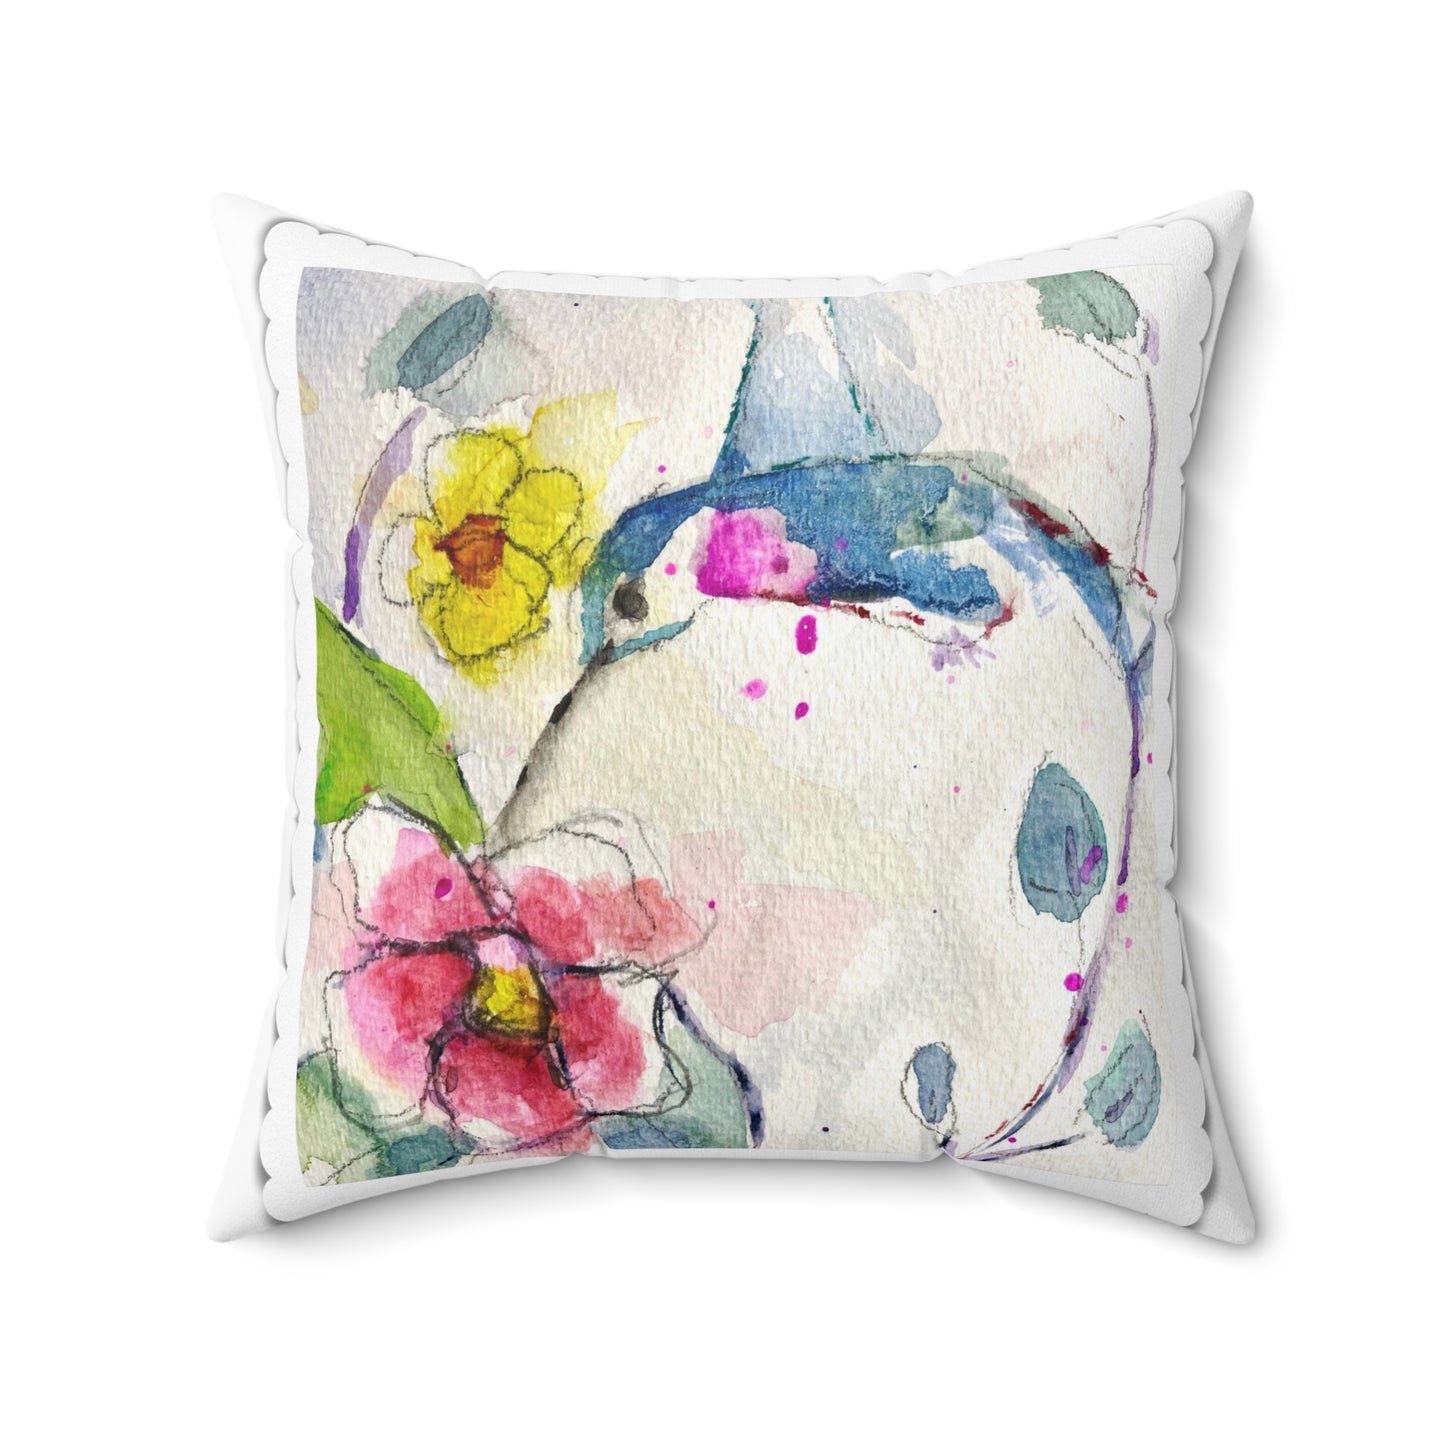 Floaty Loose Floral Hummingbird Indoor Spun Polyester Square Pillow